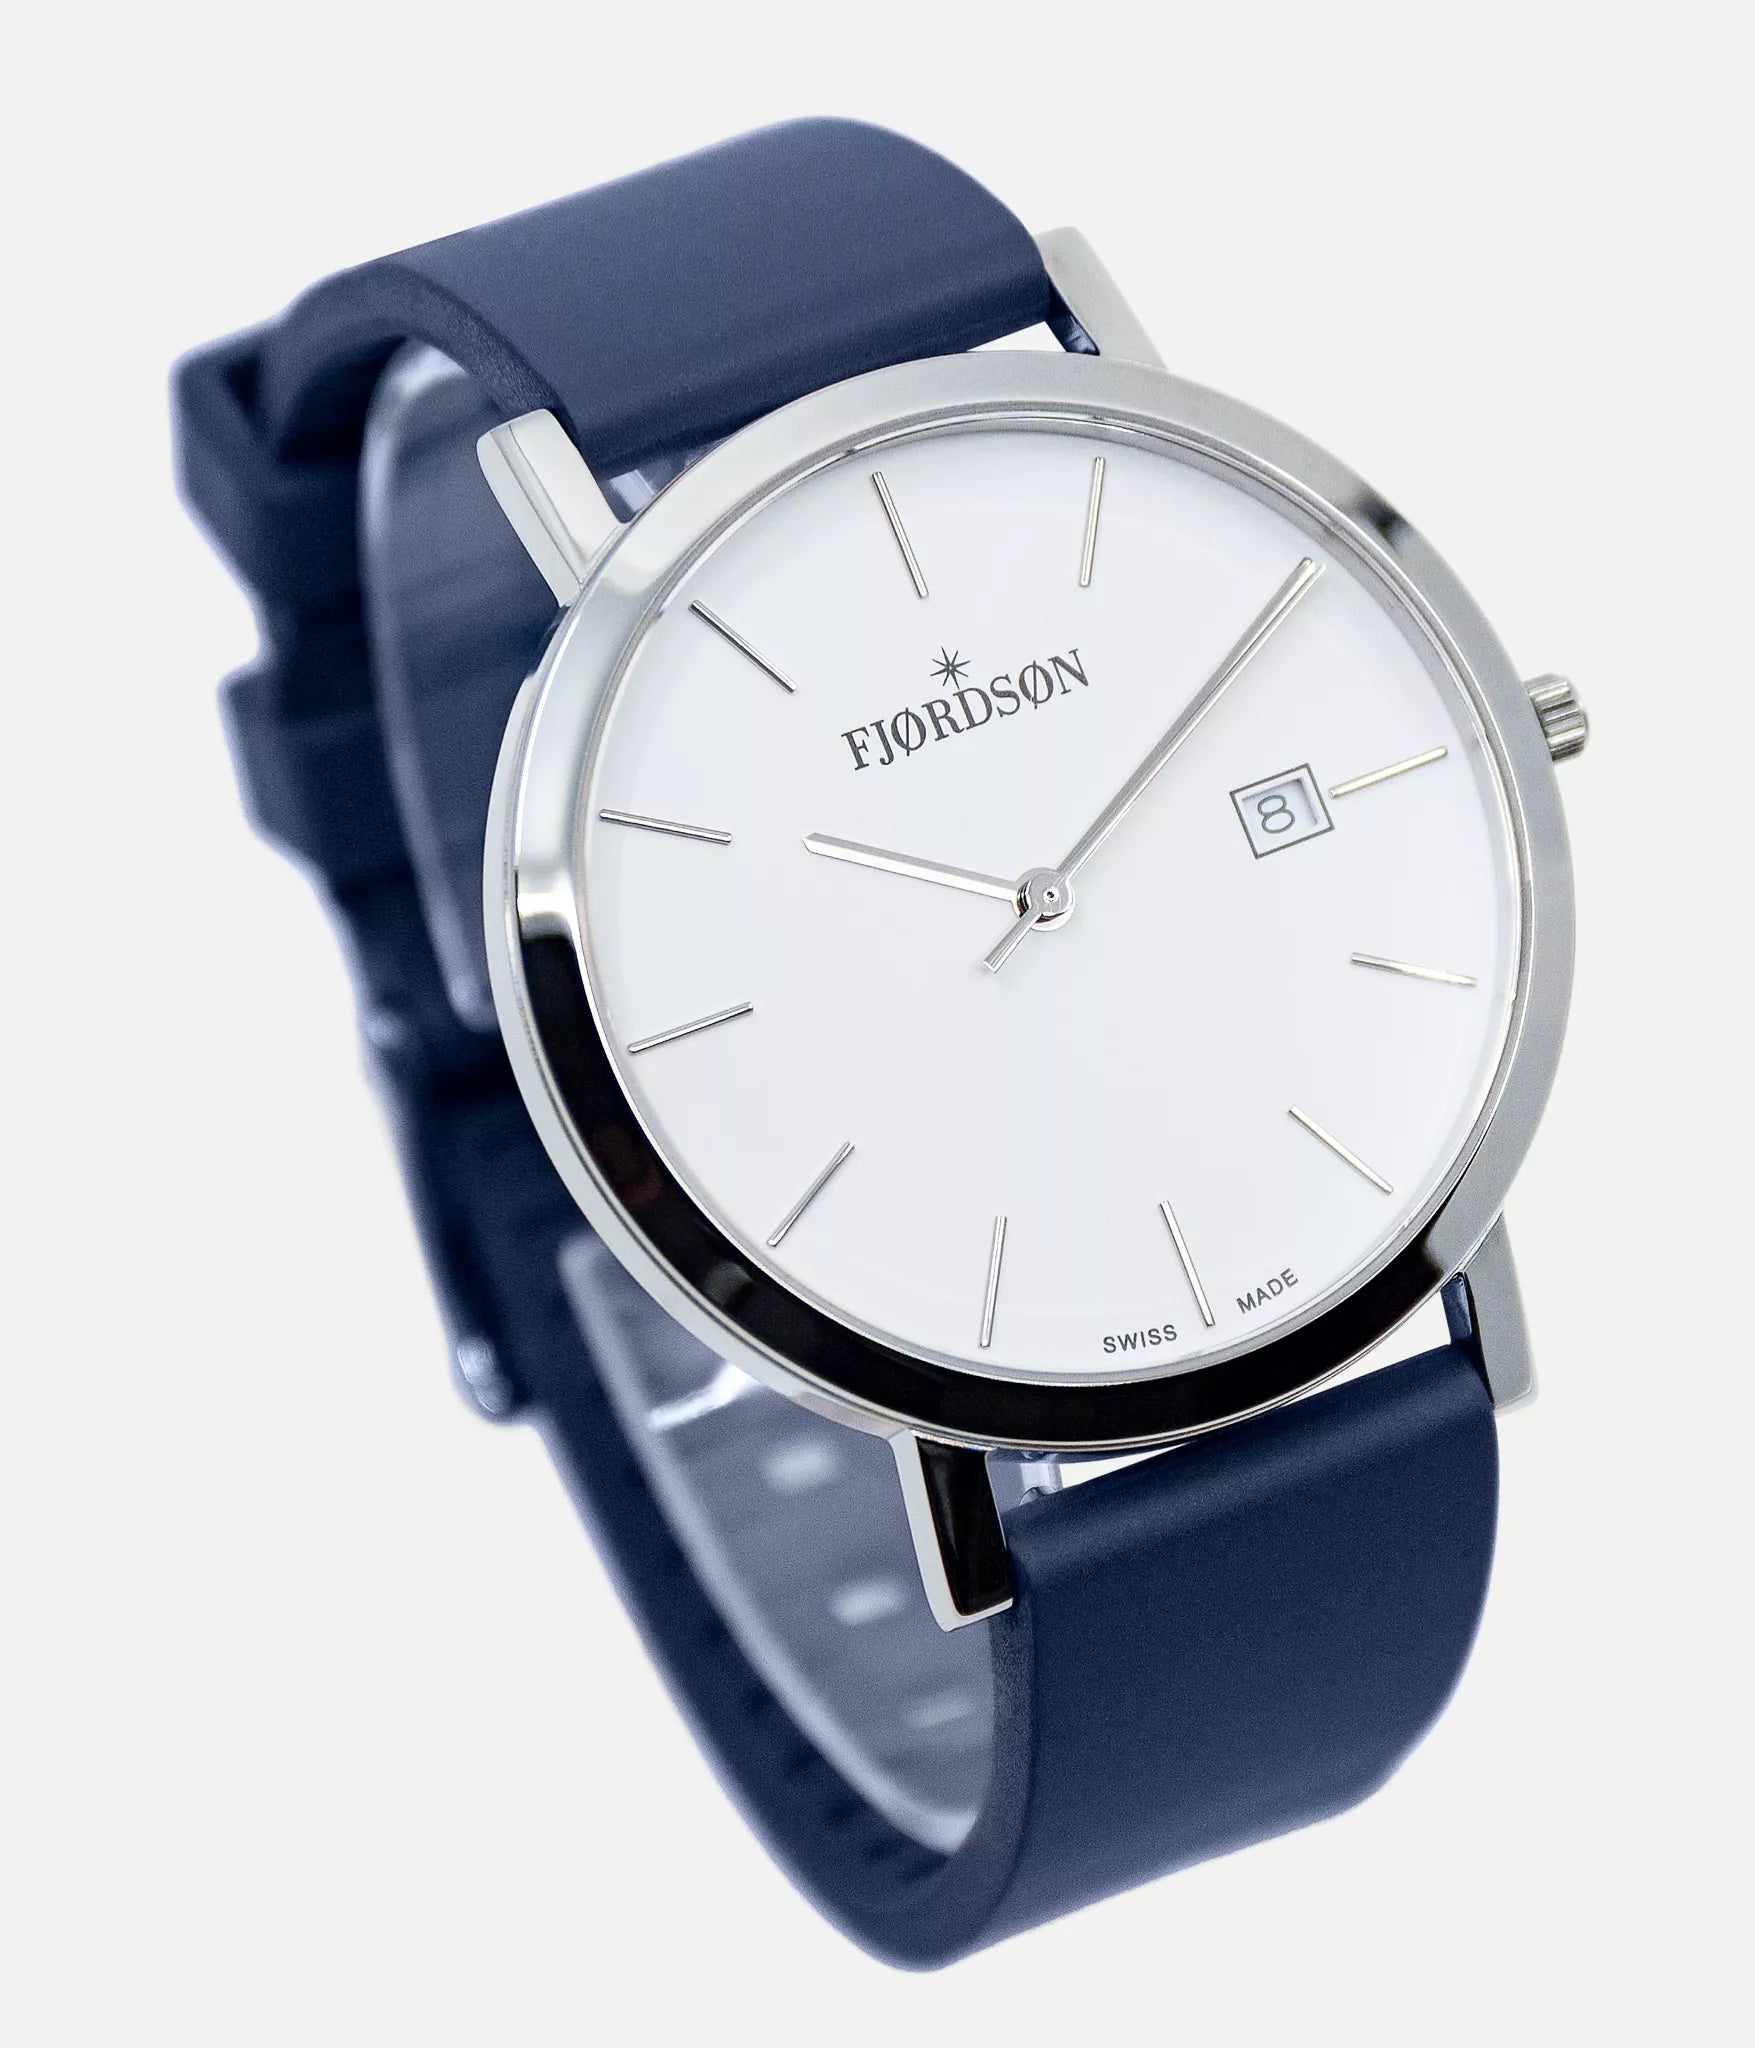 7 Vegan Wrist Watches With Leather-Free Straps for That Timeless Gift